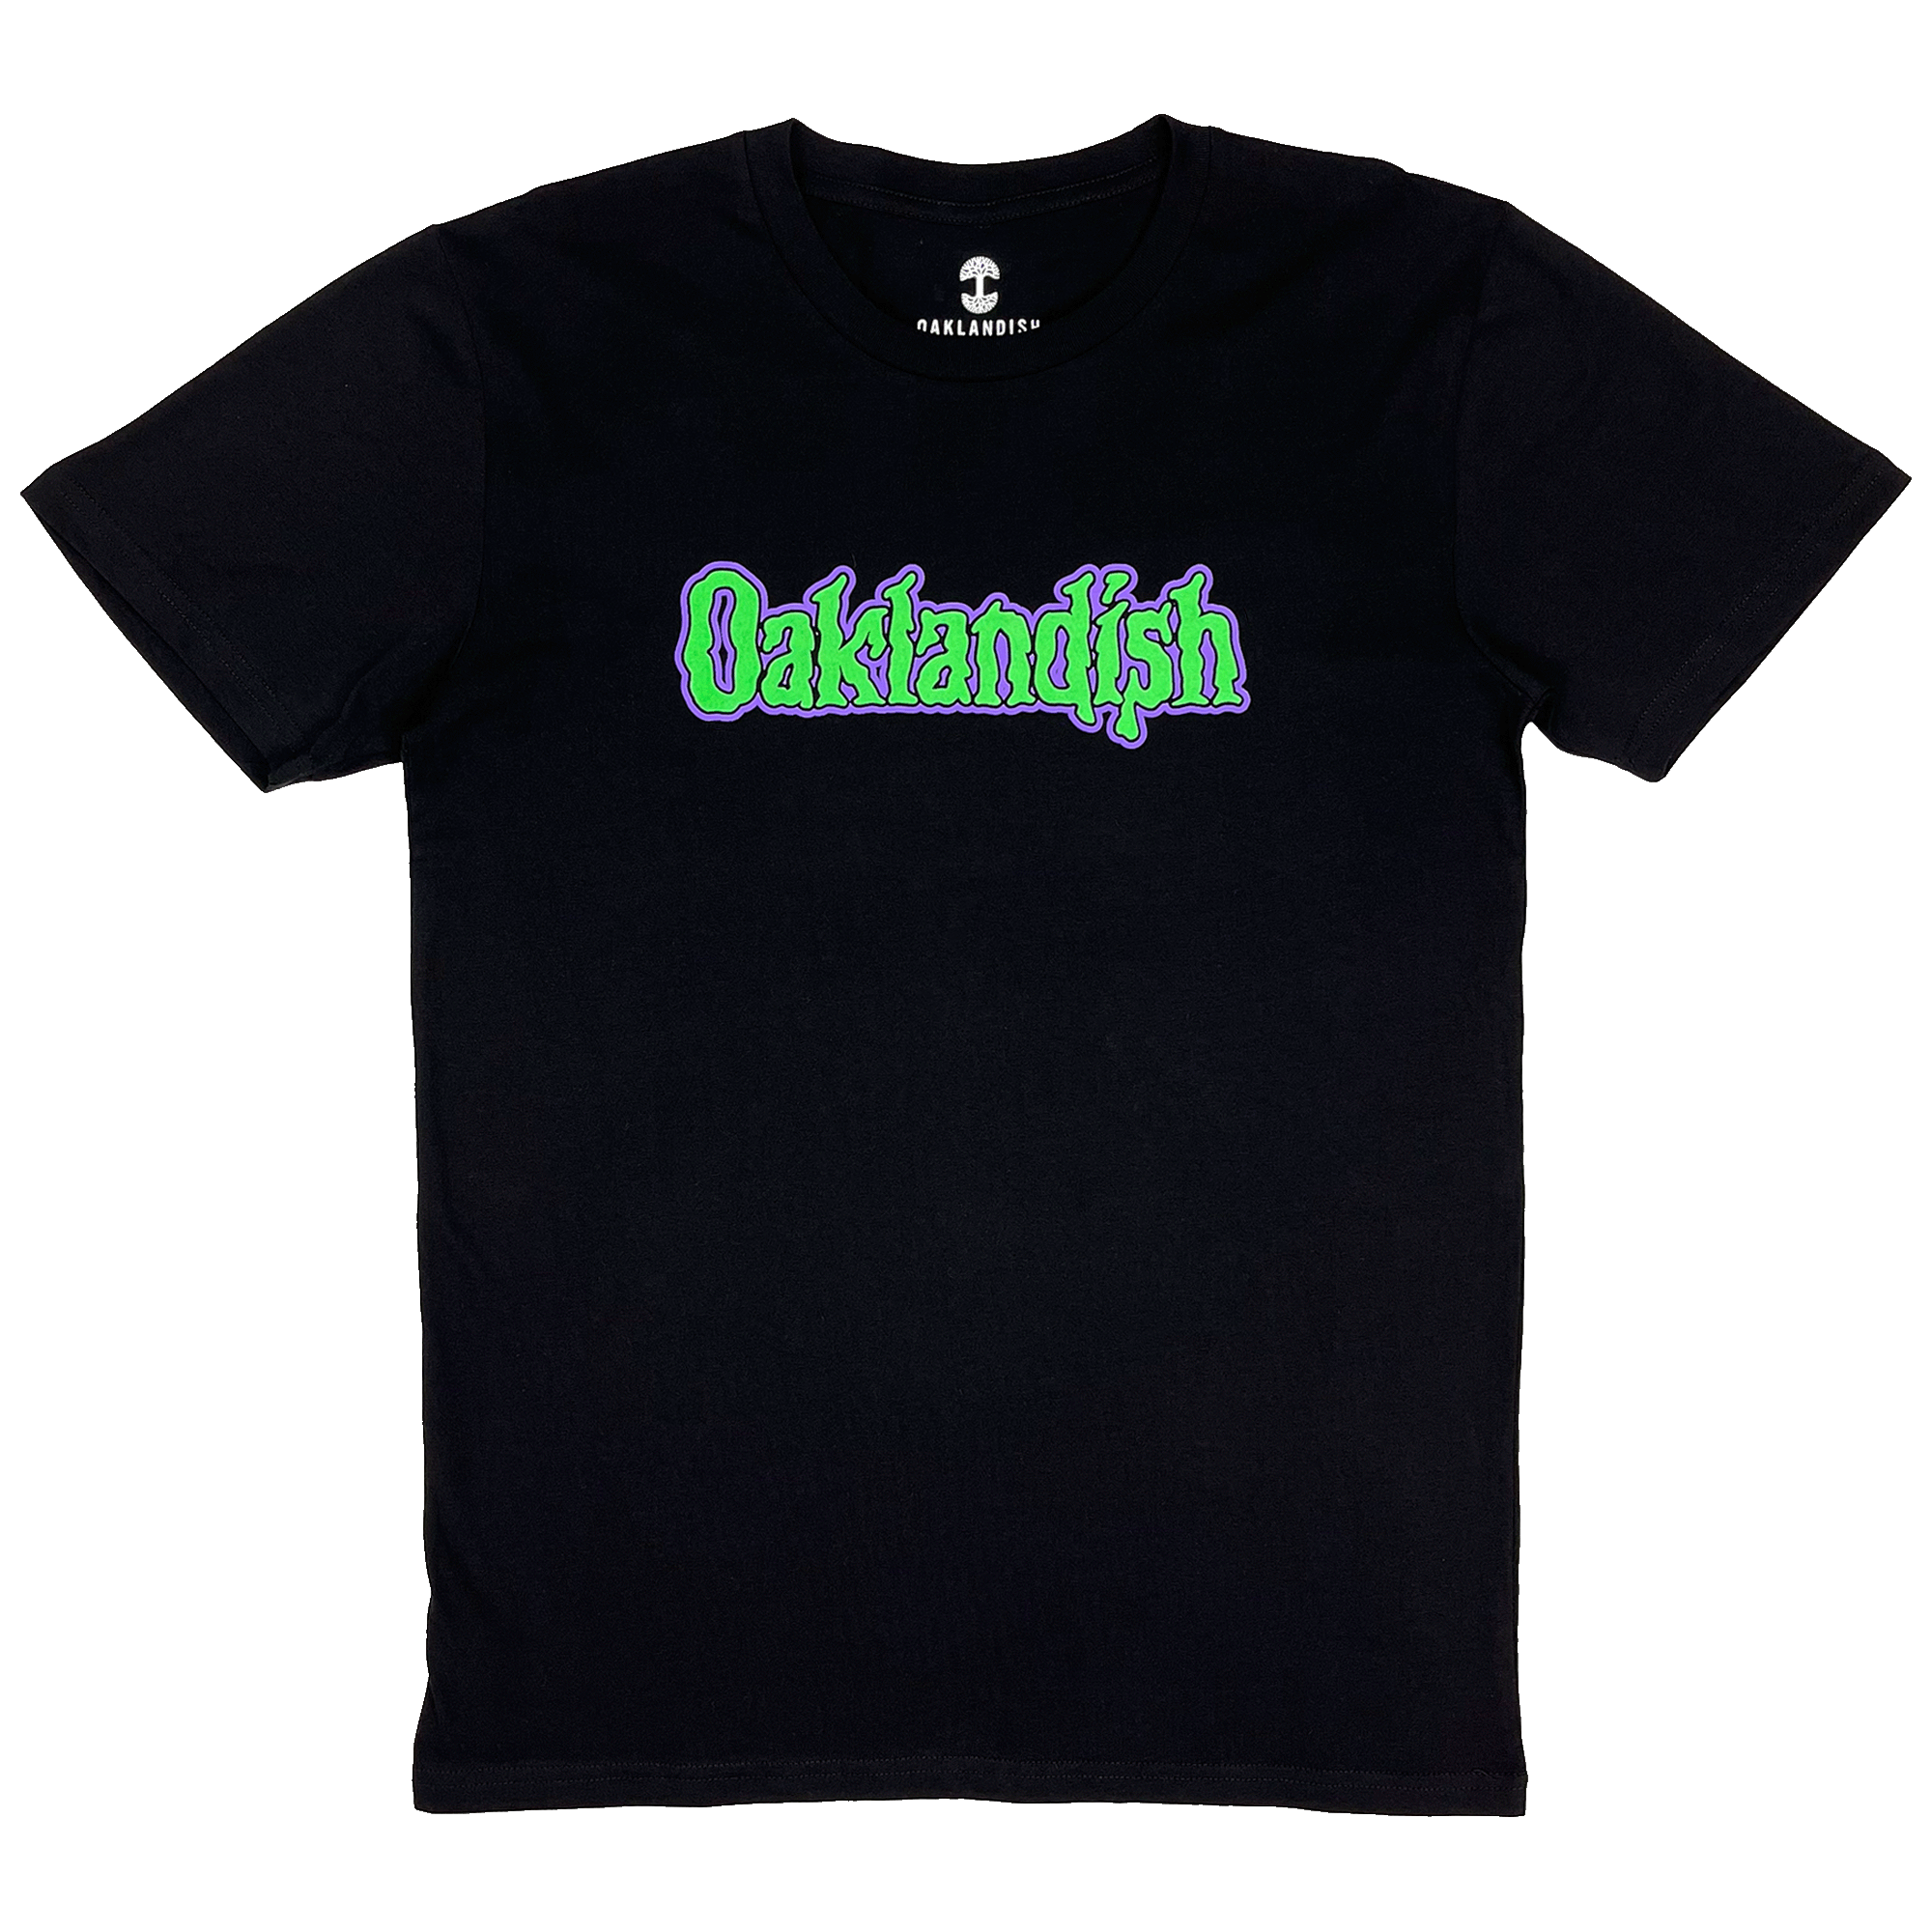 Black t-shirt with Oaklandish wordmark in green and purple spooky dripping font on the front chest.